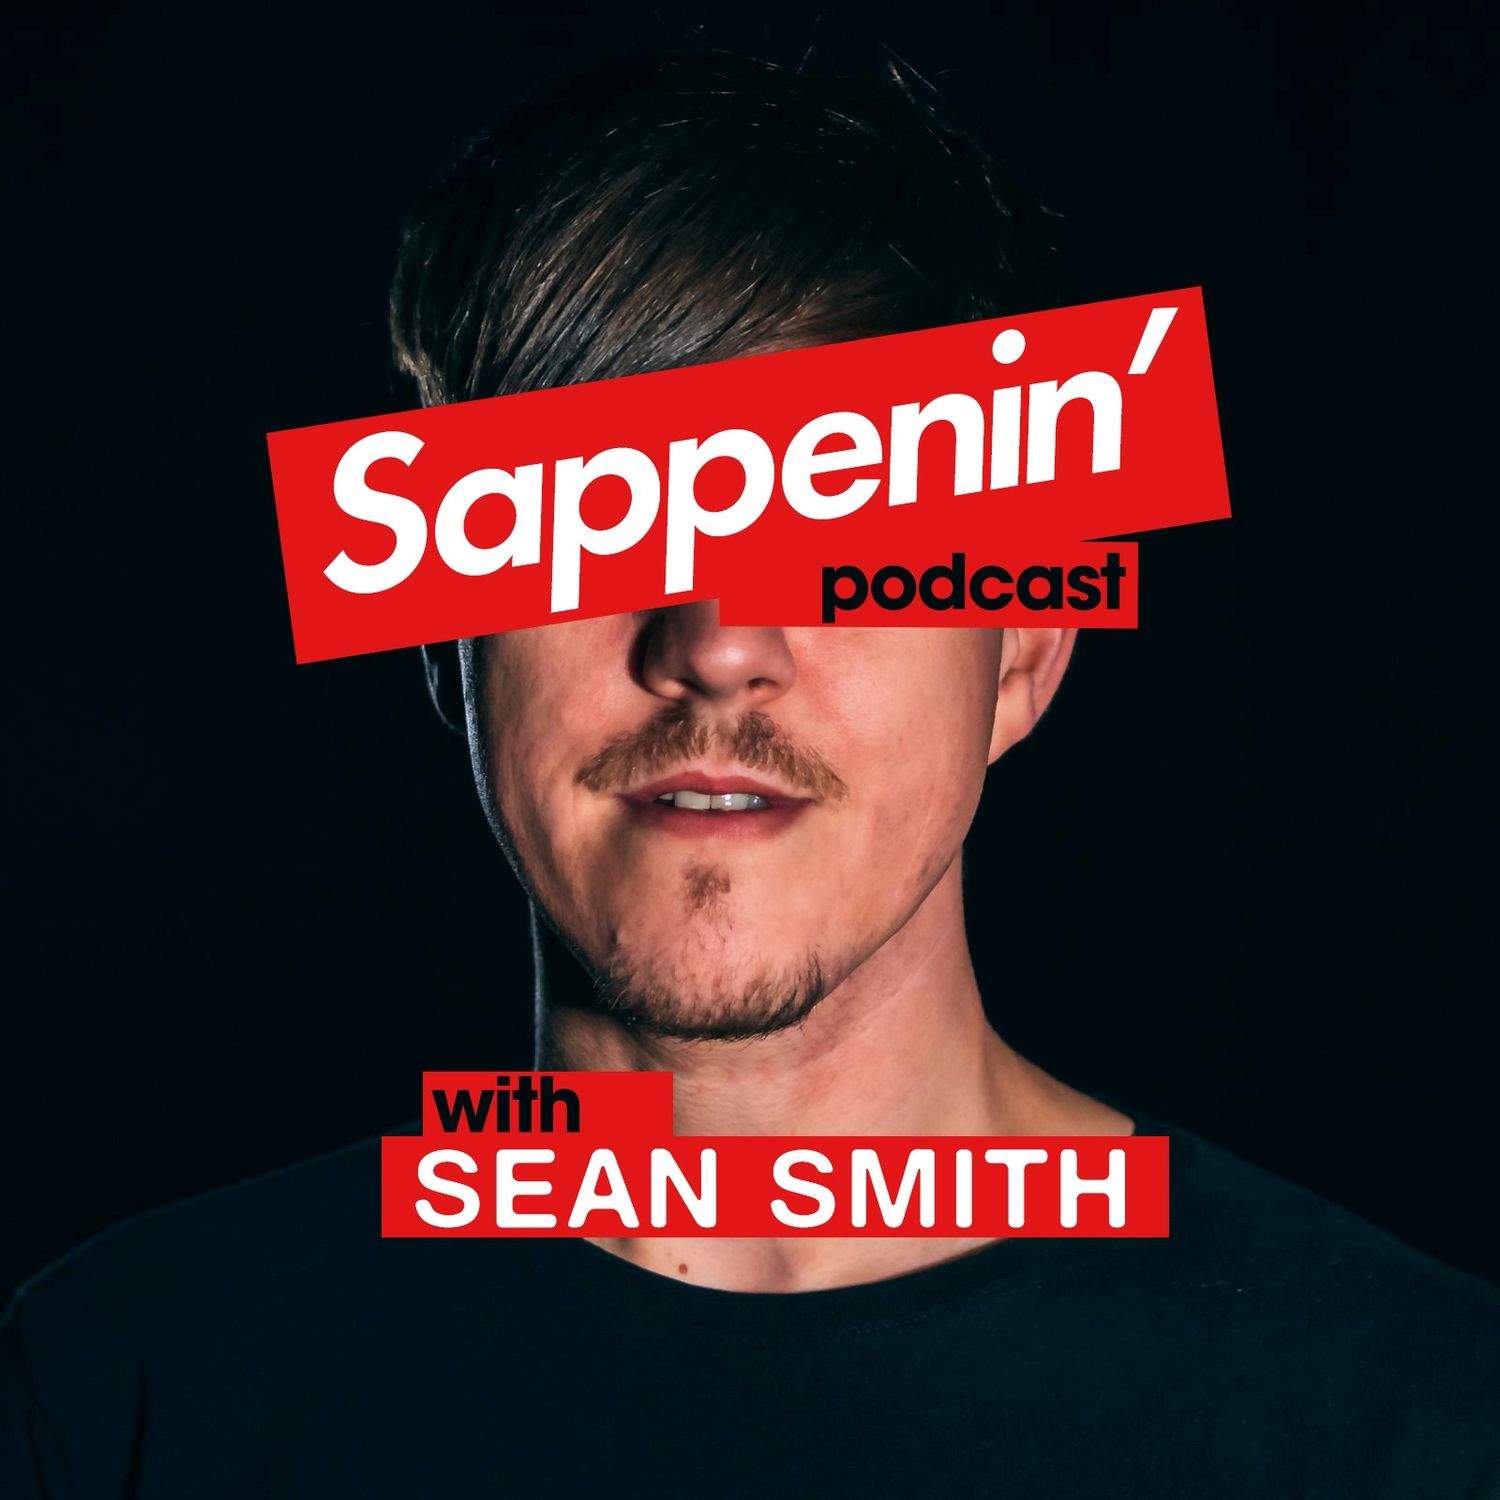 Sappenin Podcast with Sean Smith